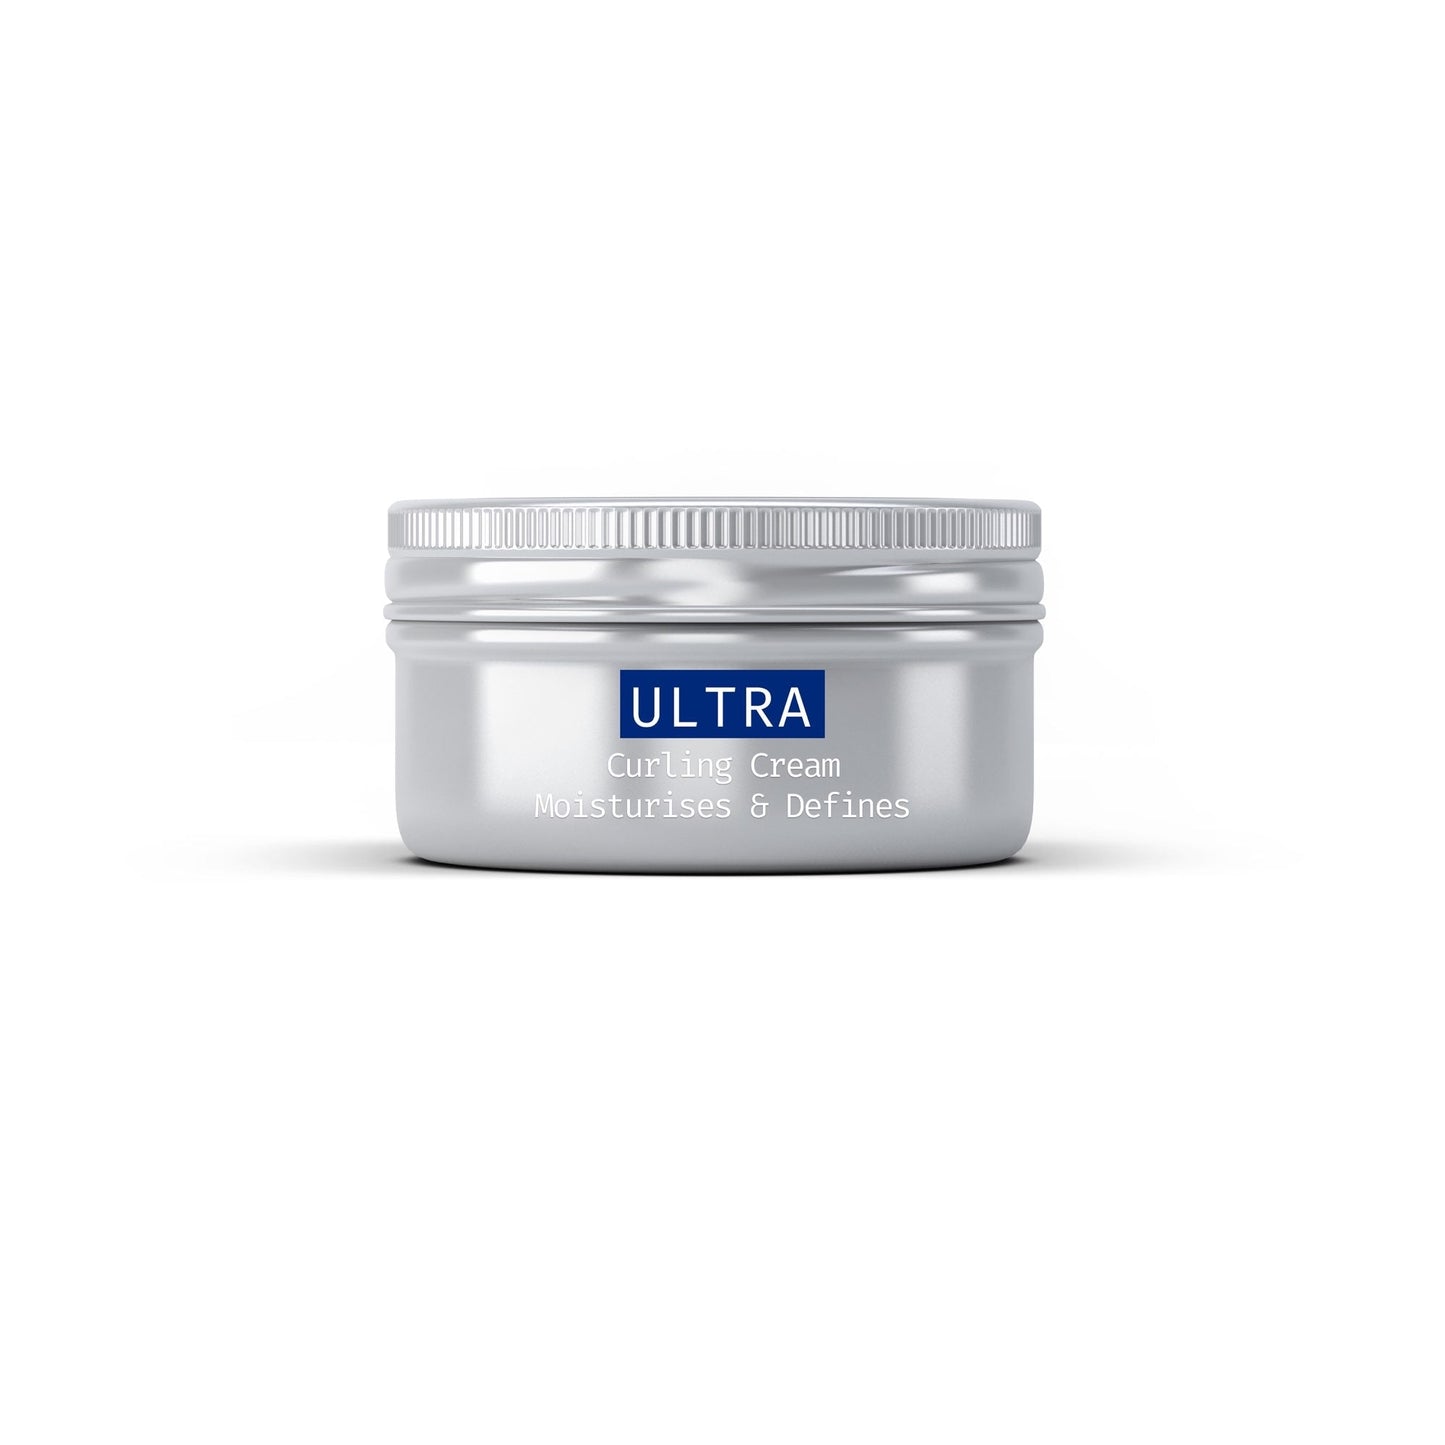 SAMPLE  ULTRA -  Ultimate Curling Cream with Marula Oil, Avocado Oil & Shea Butter for Strength & Shine